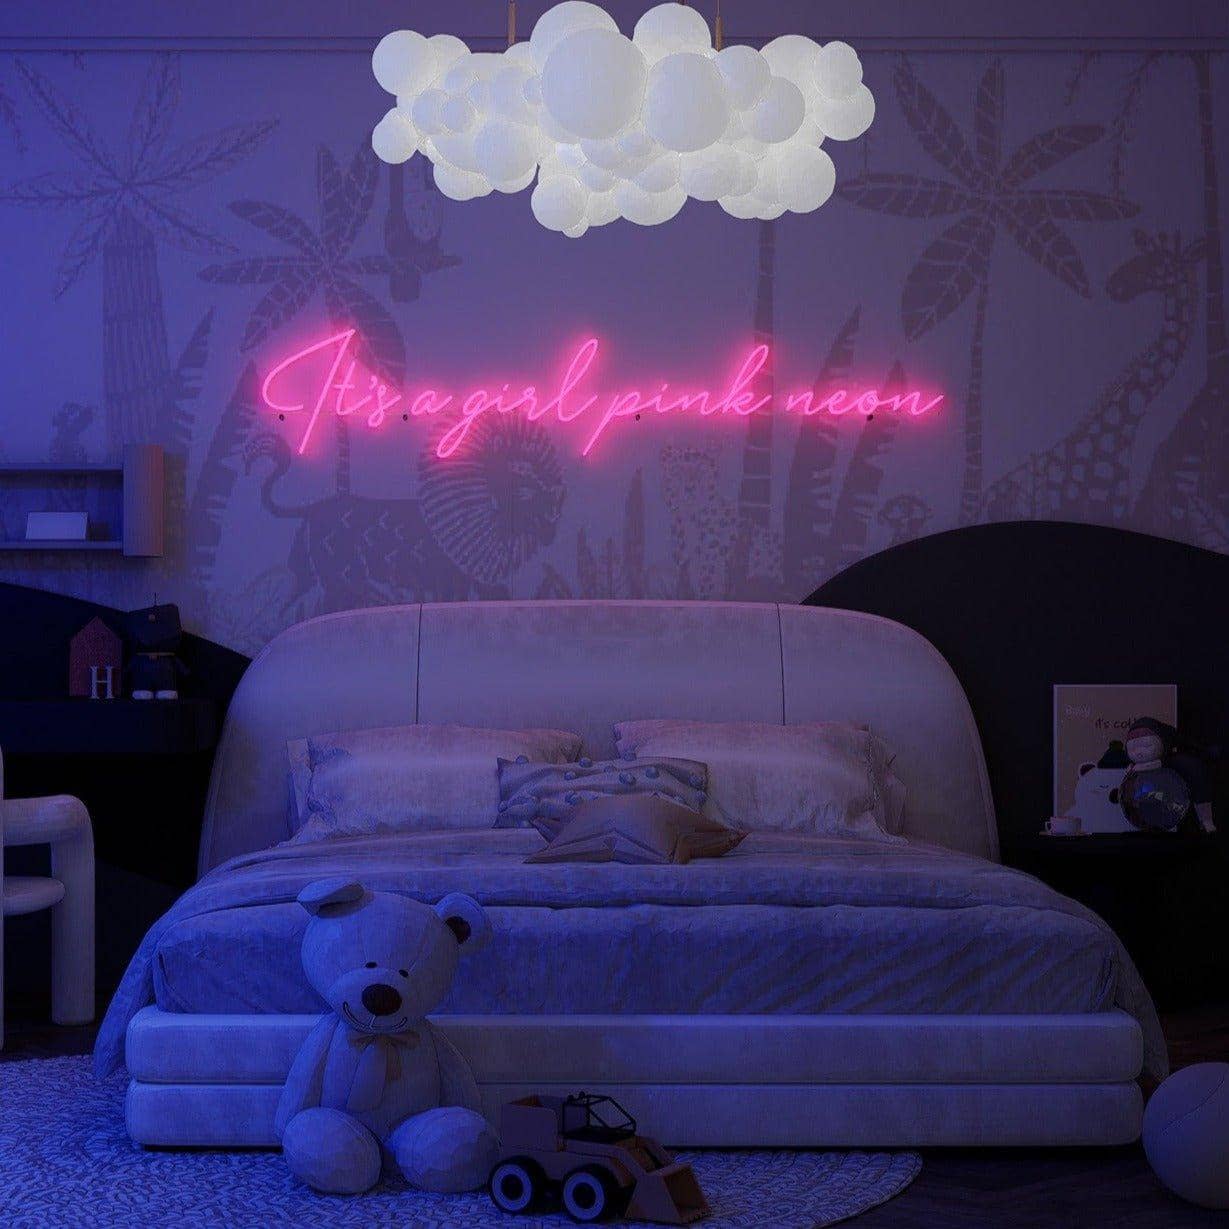 light-up-pink-neon-lights-hanging-on-the-wall-for-display-at-night-it's-a-girl-pink-neon